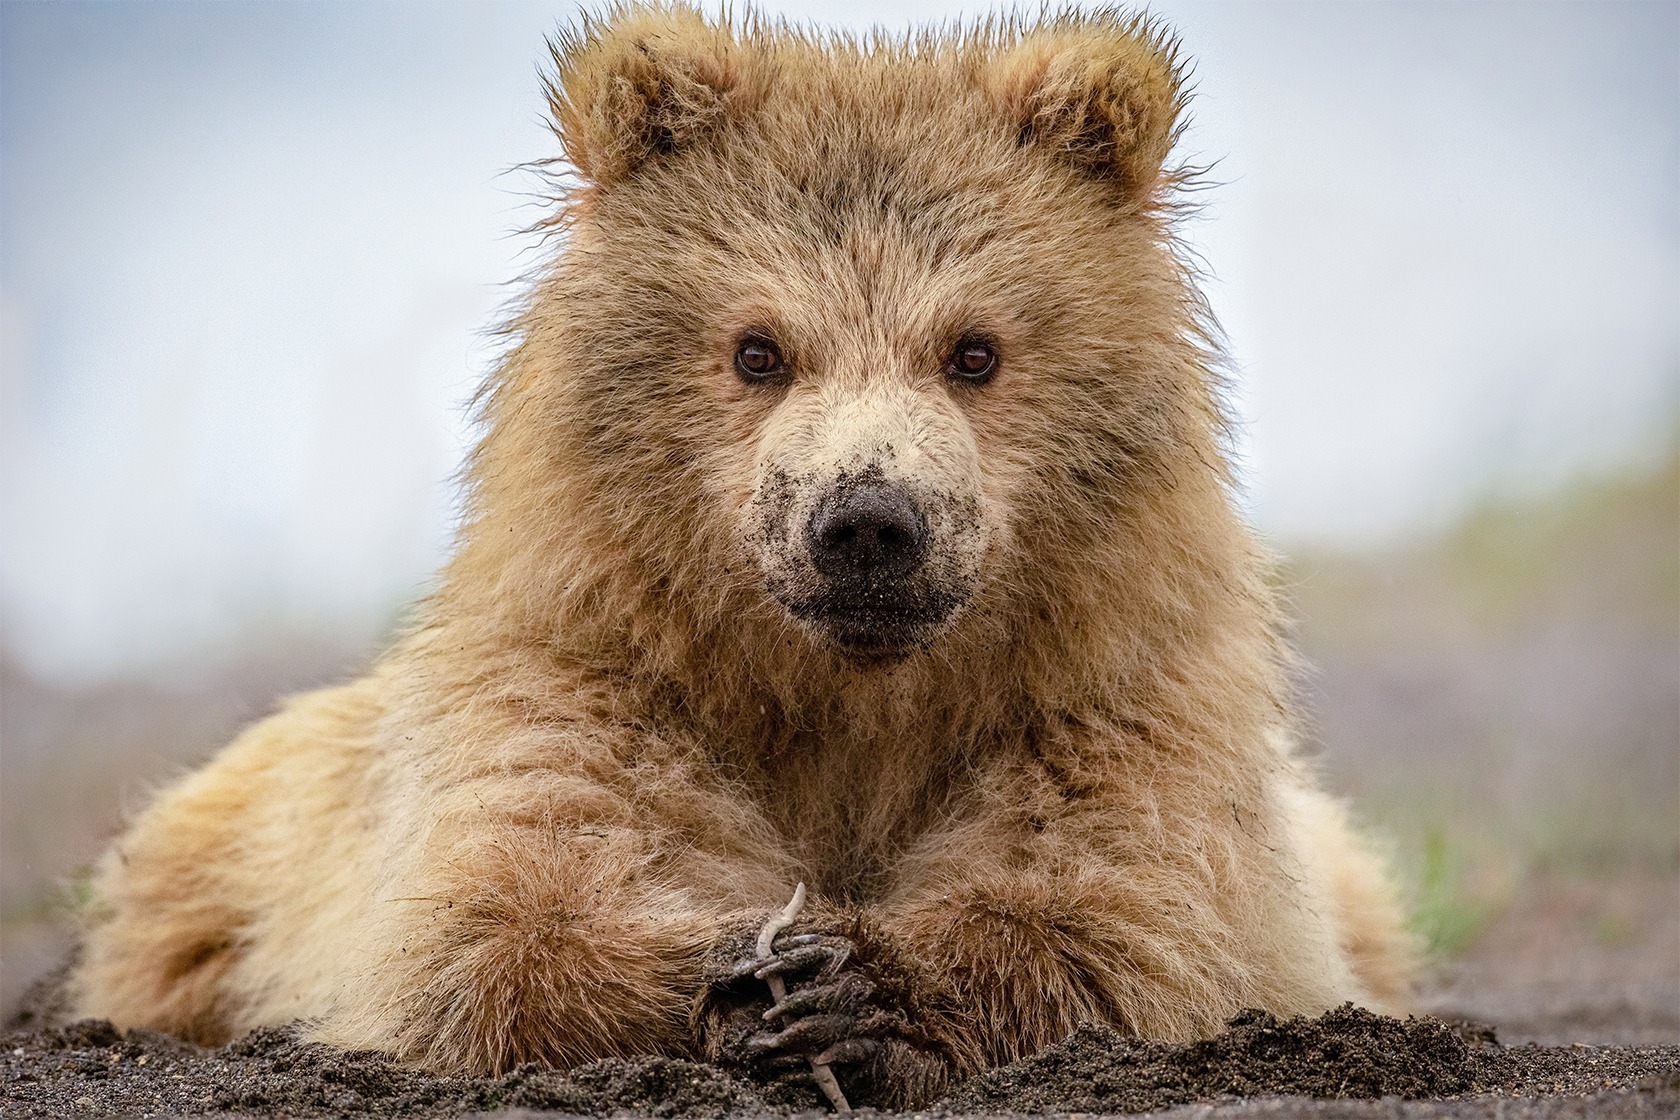 close on bear cub sitting in dirt, snout covered in dirt, facing toward camera